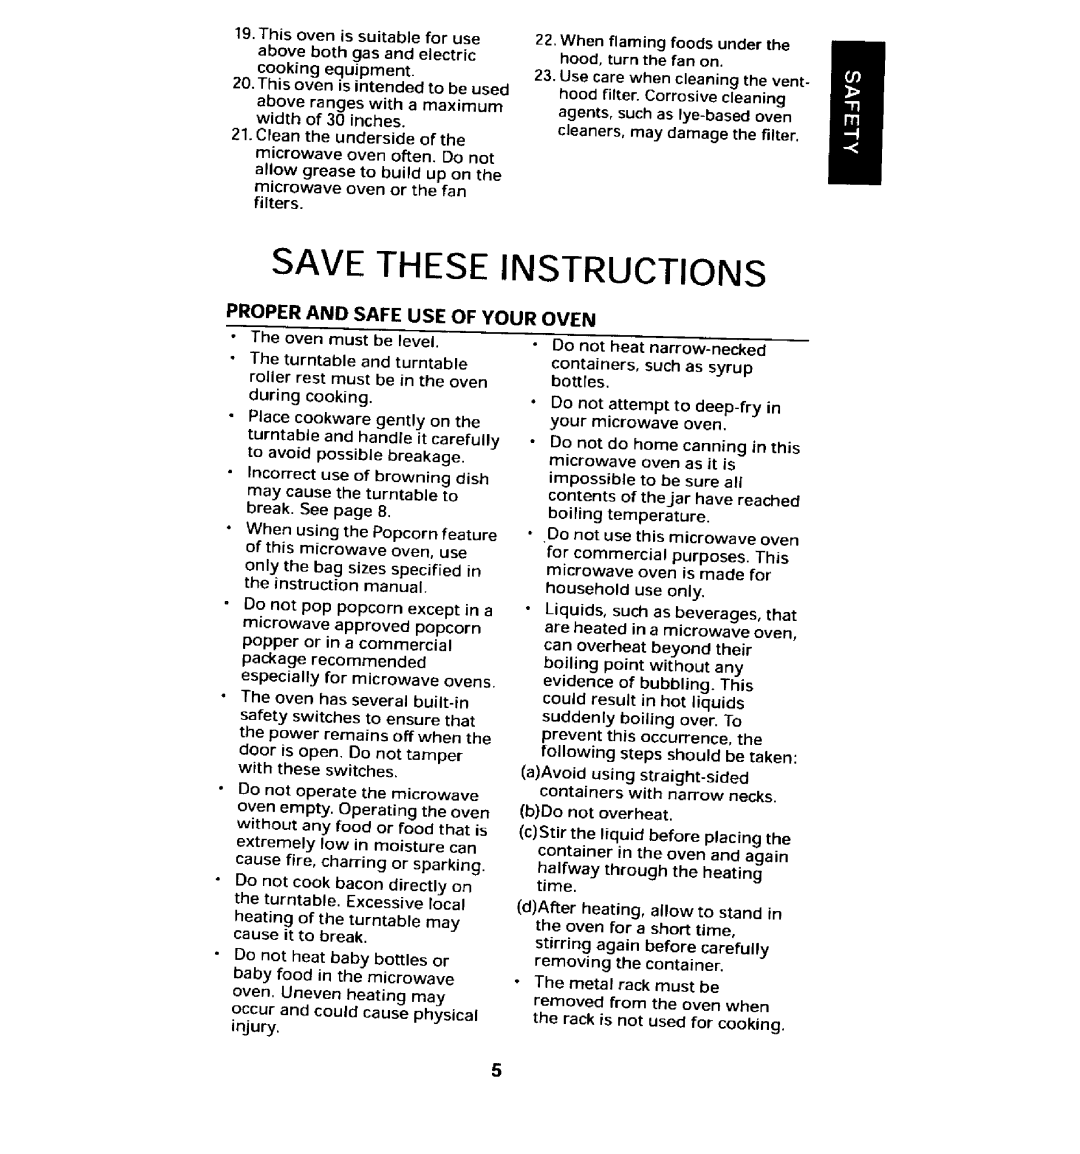 Maytag MMV5100AA manual Proper And Safe Use Of Your Oven, Save These Instructions 